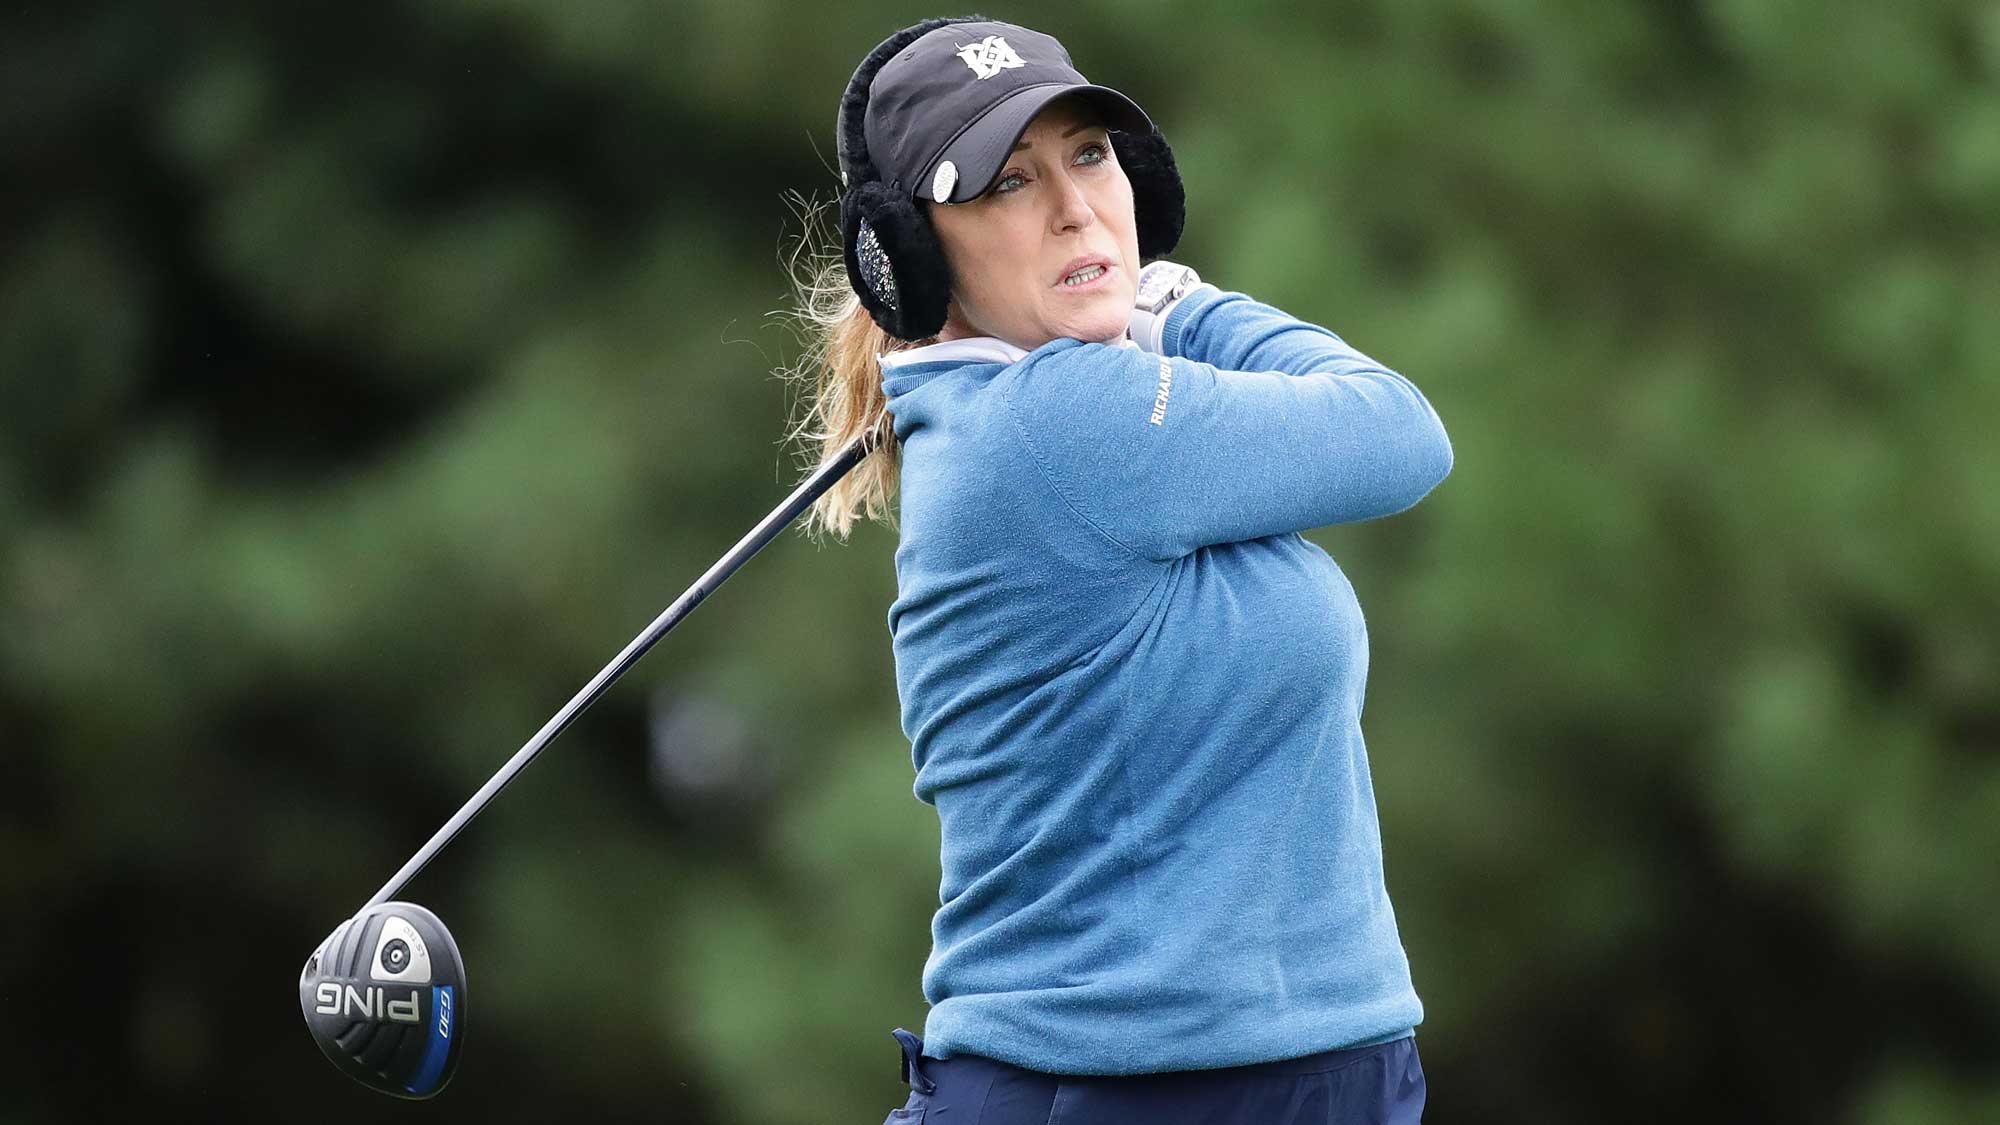 Cristie Kerr of United States plays a tee shot on the 2nd hole during the first round of the LPGA KEB Hana Bank Championship